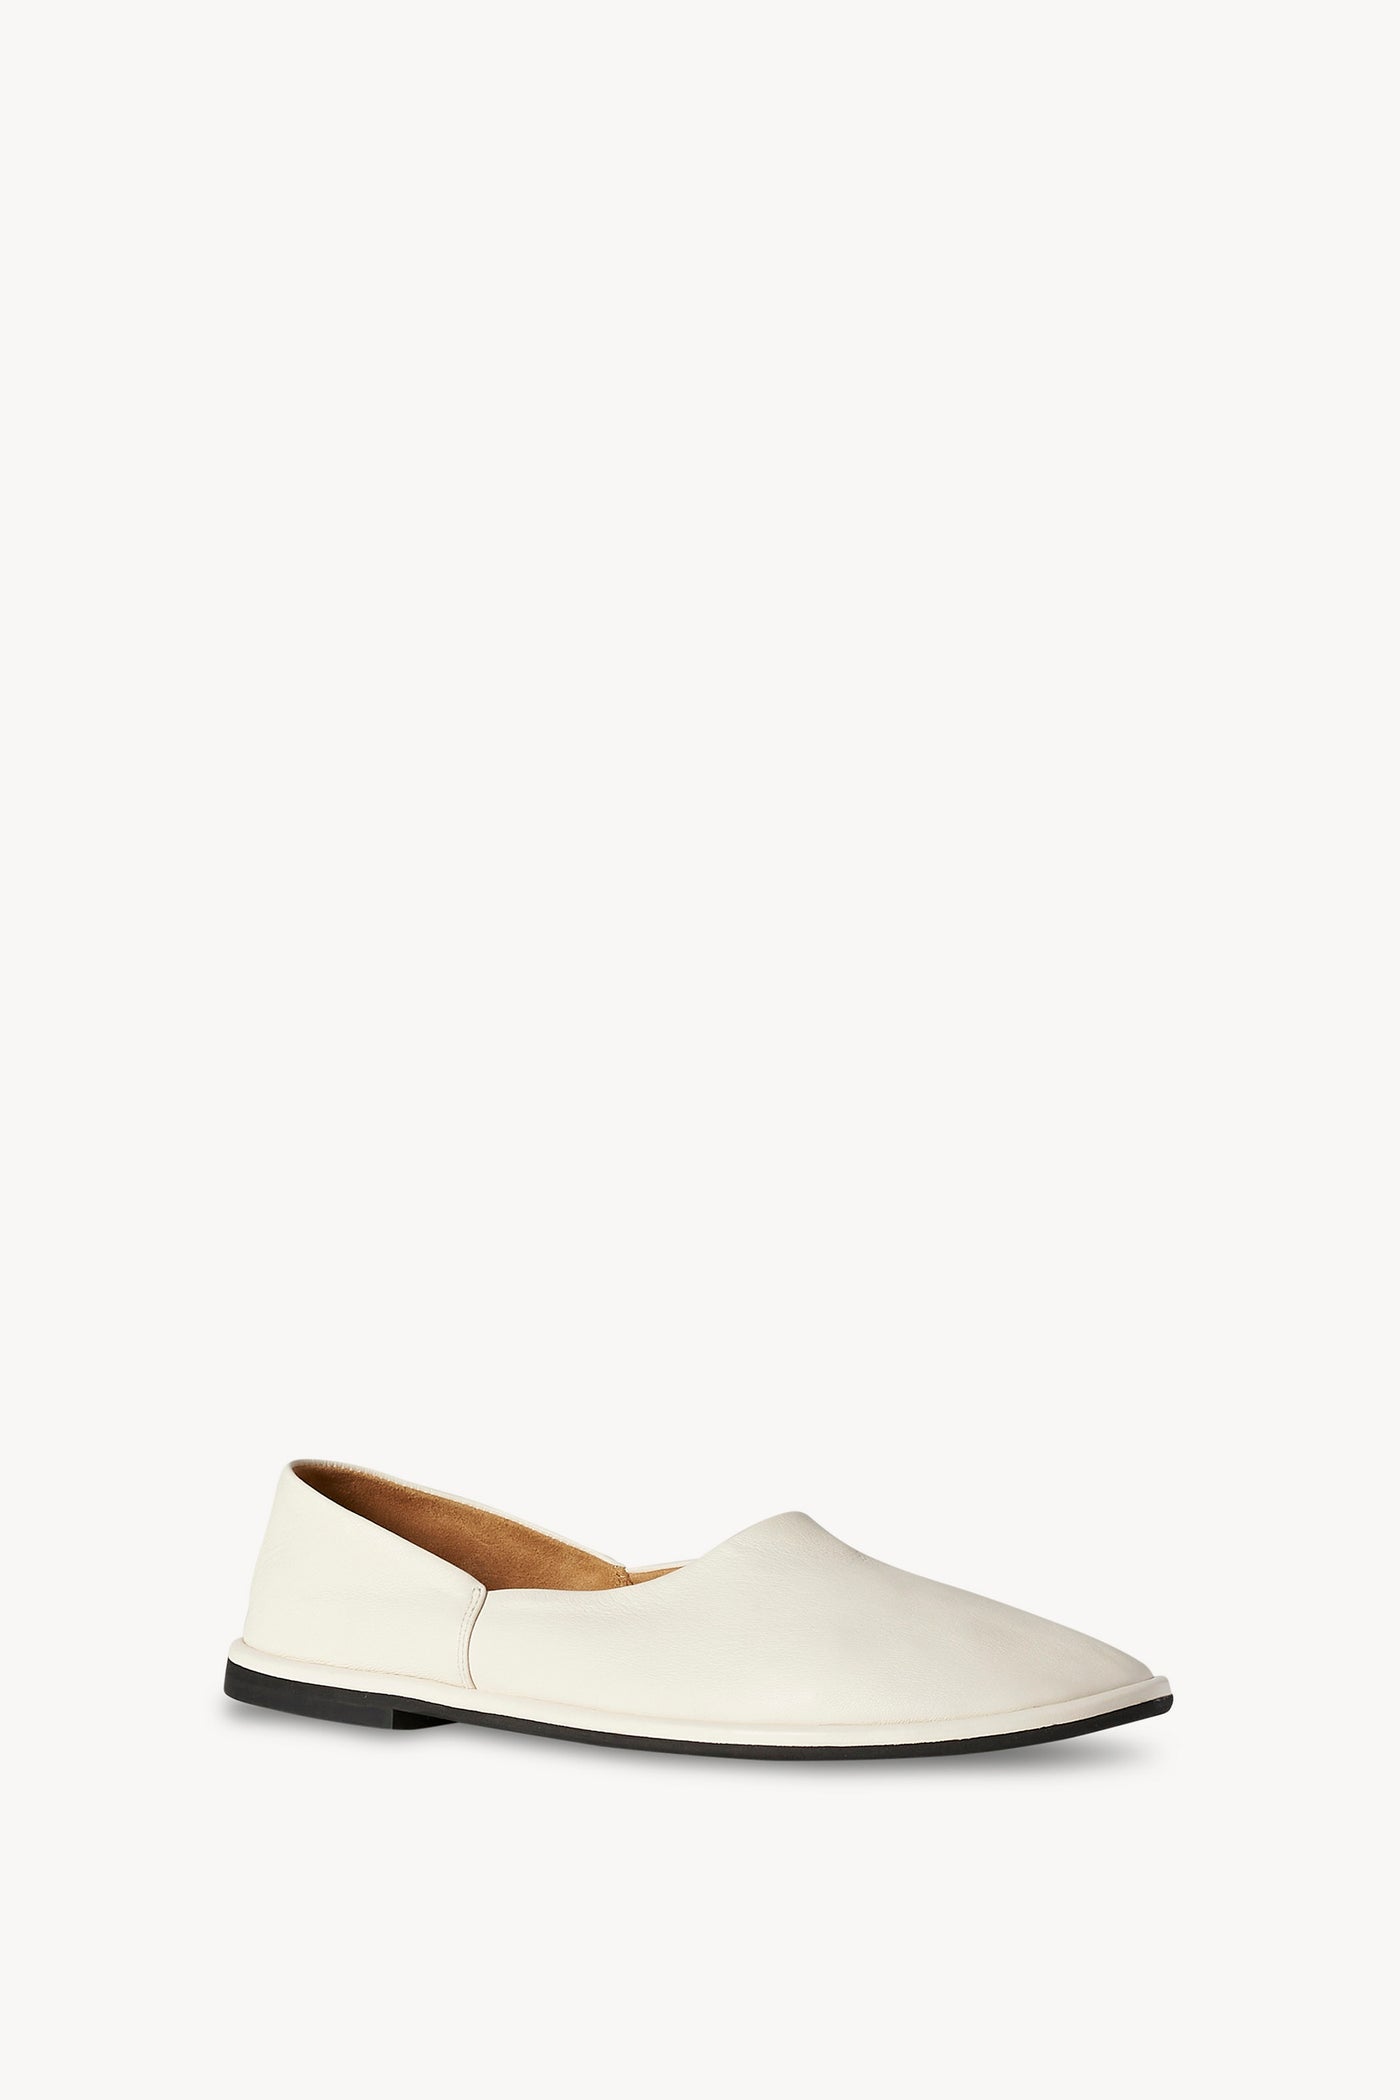 the-row-canal-leather-slip-on-milk-amarees